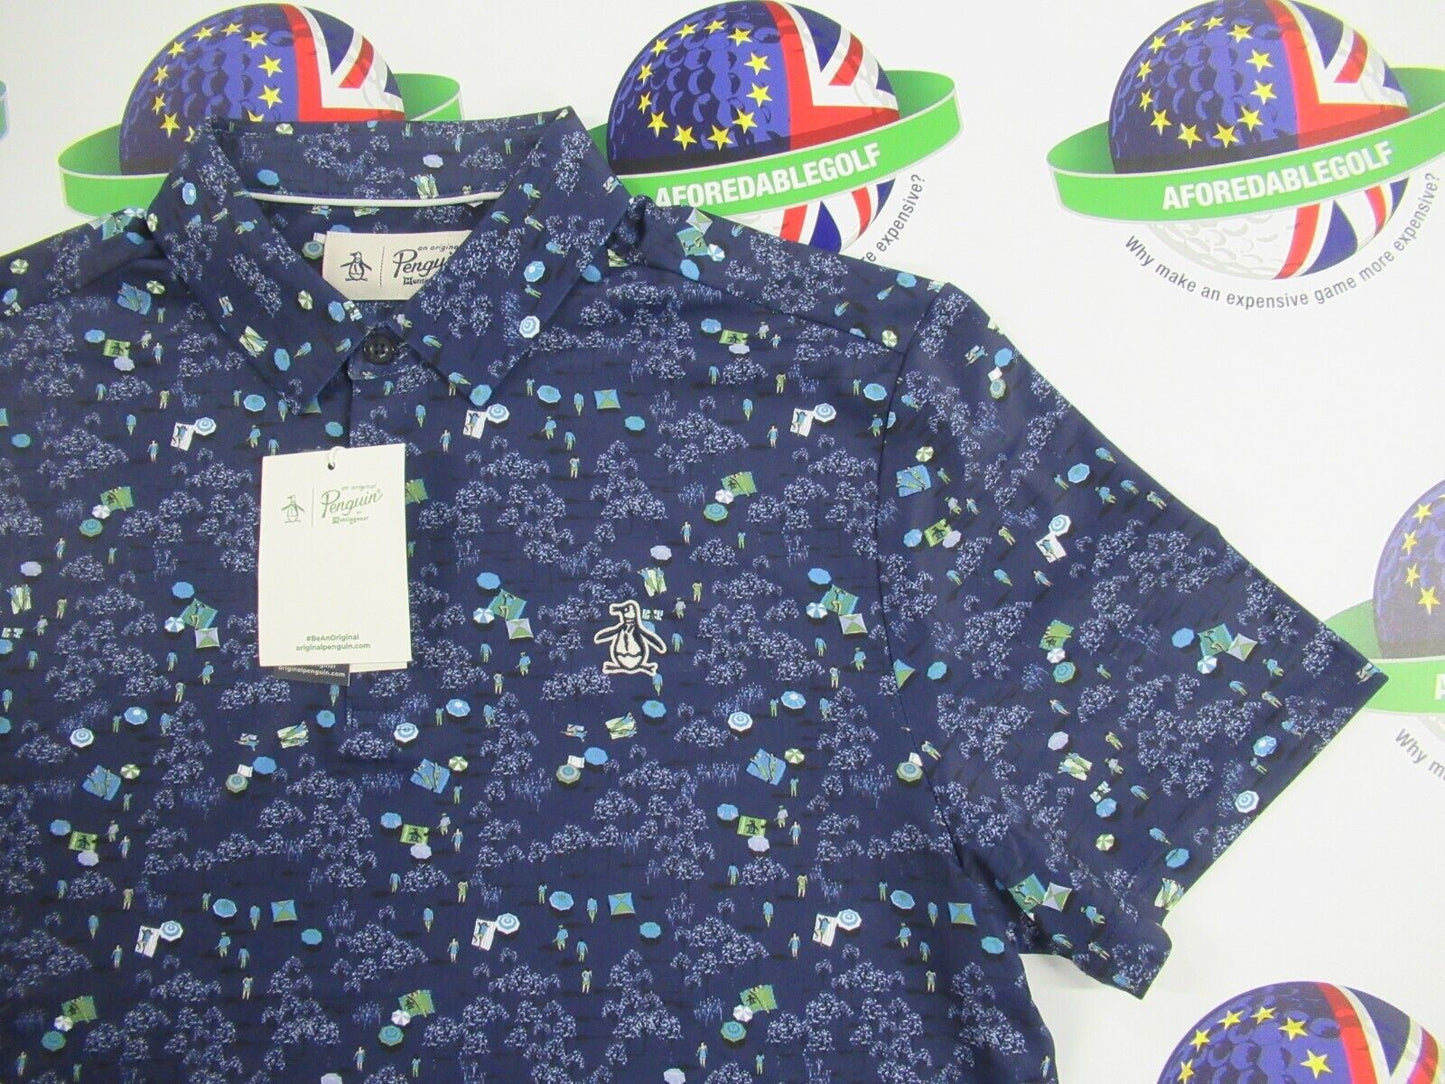 original penguin pete in the park print polo shirt astral night uk size small